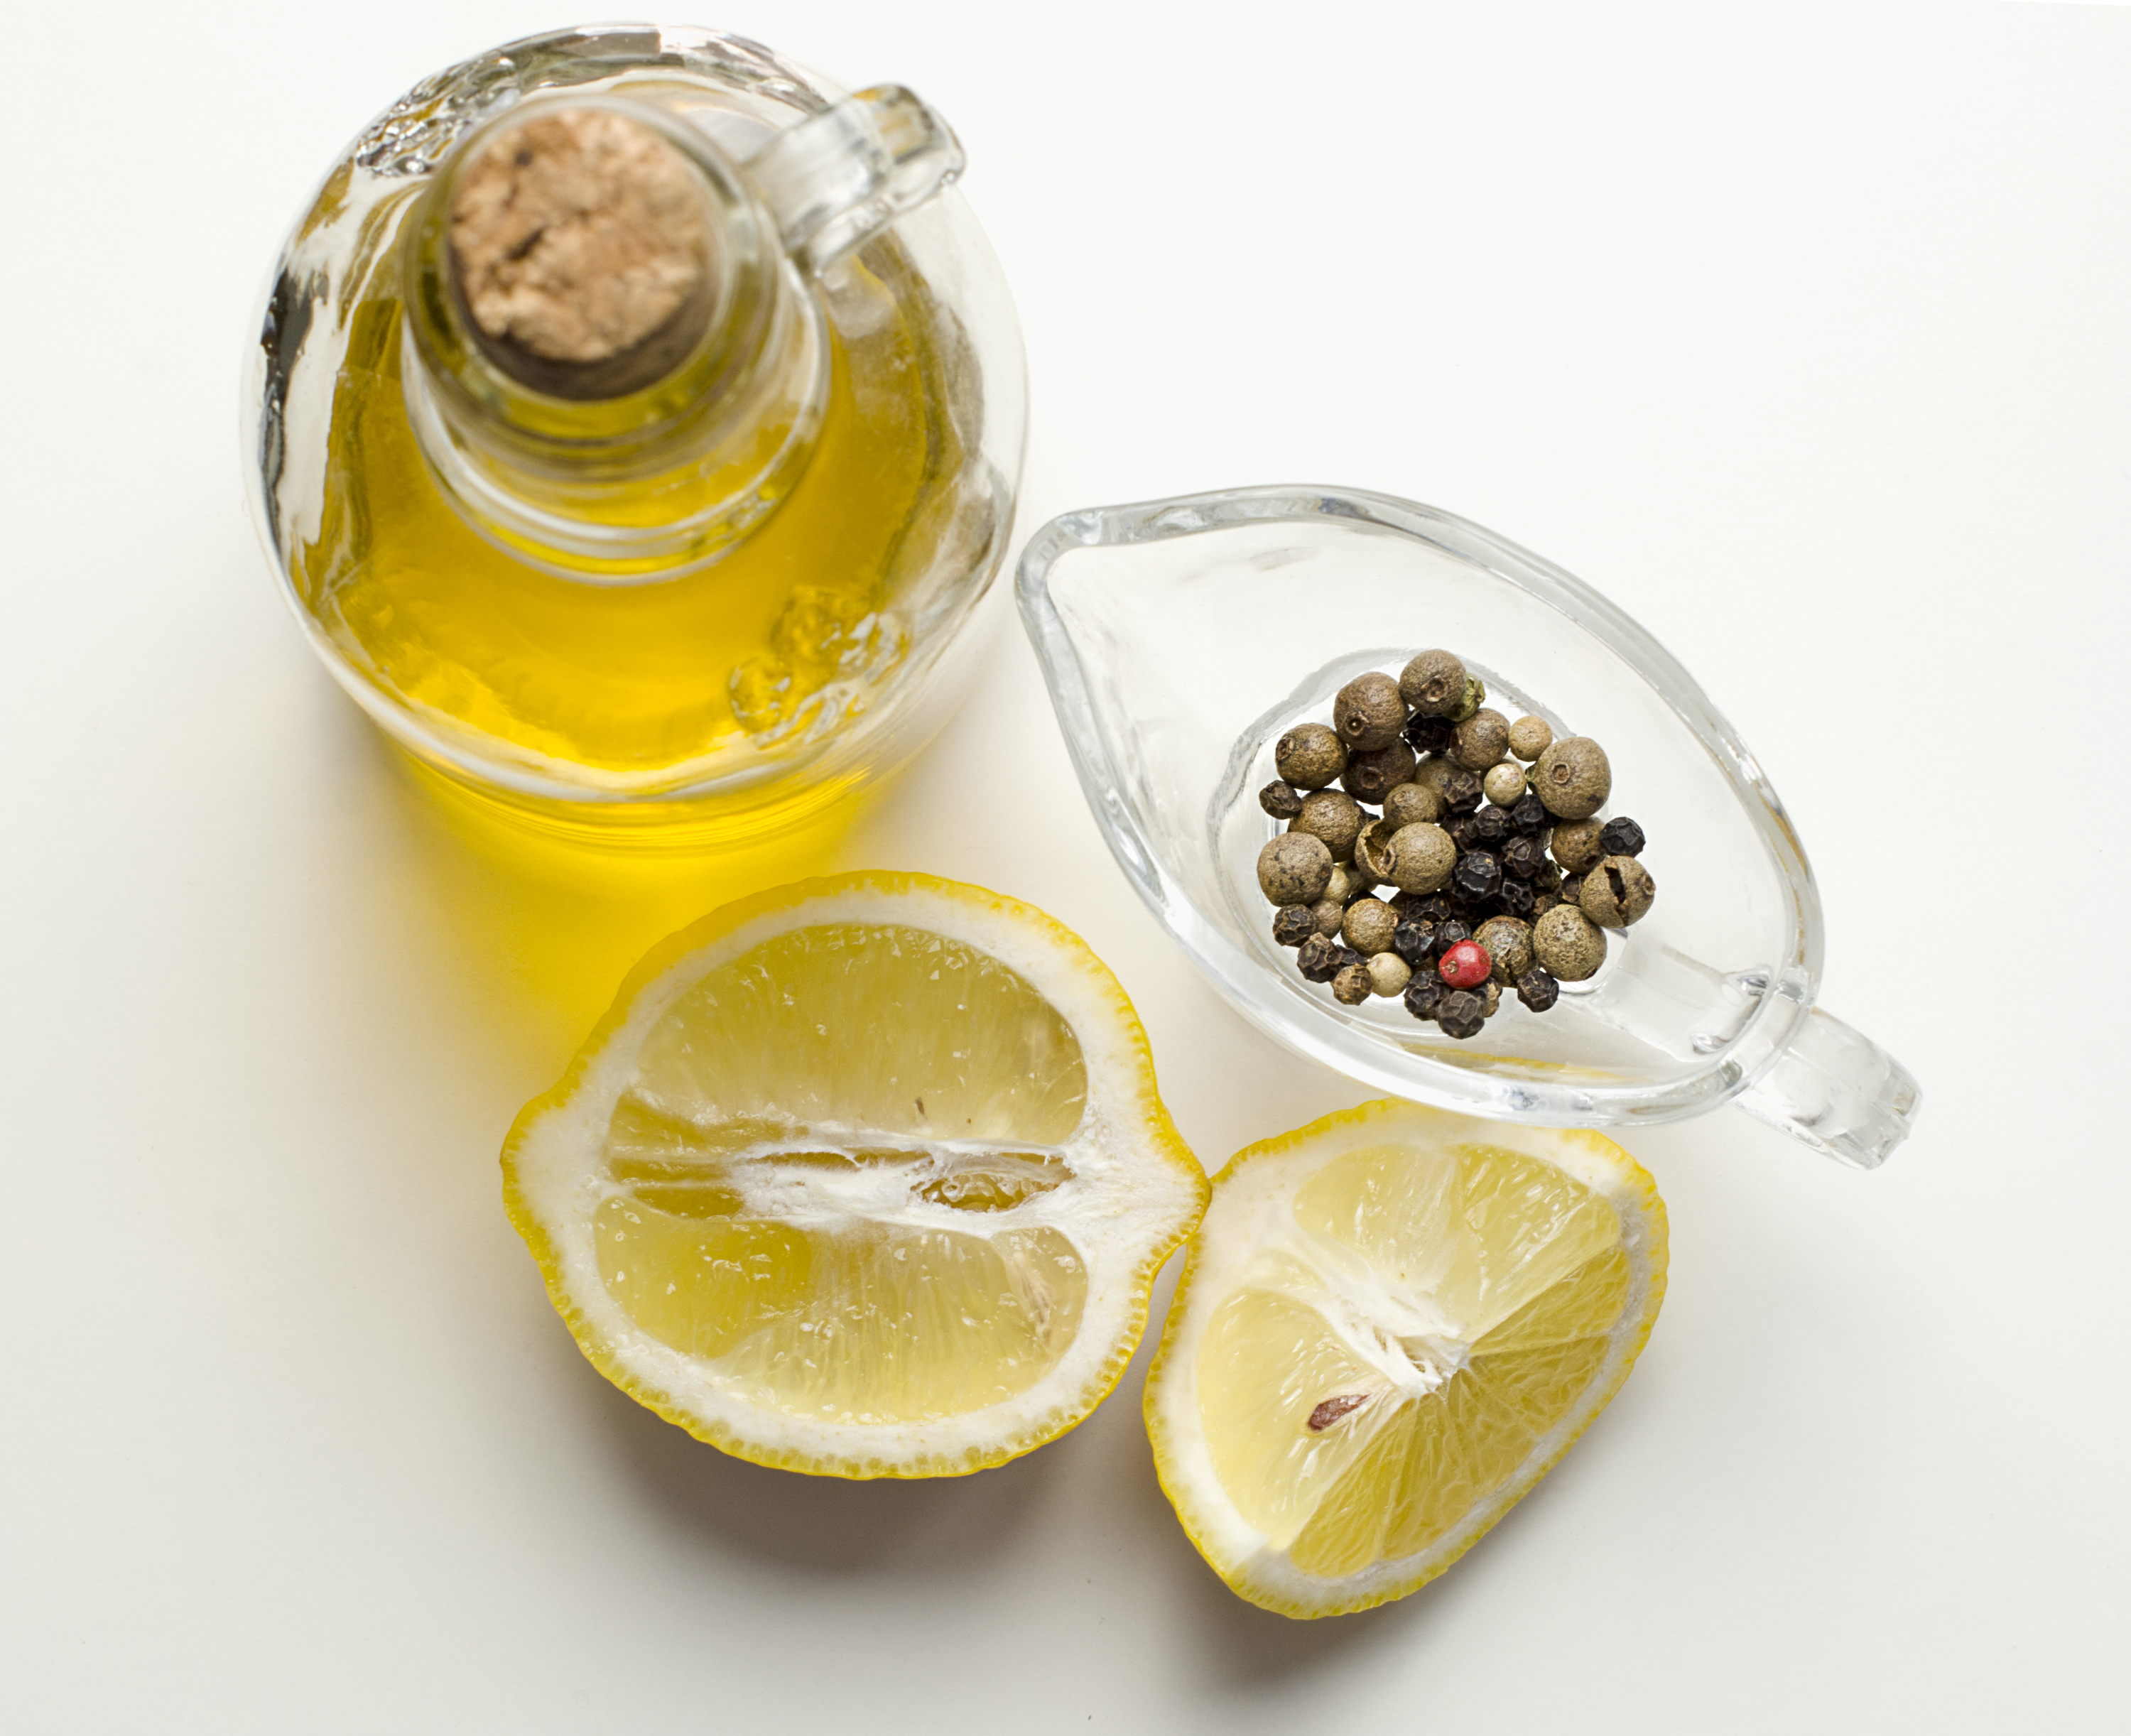 kidney stones natural remedy combines lemon juice and olive oil